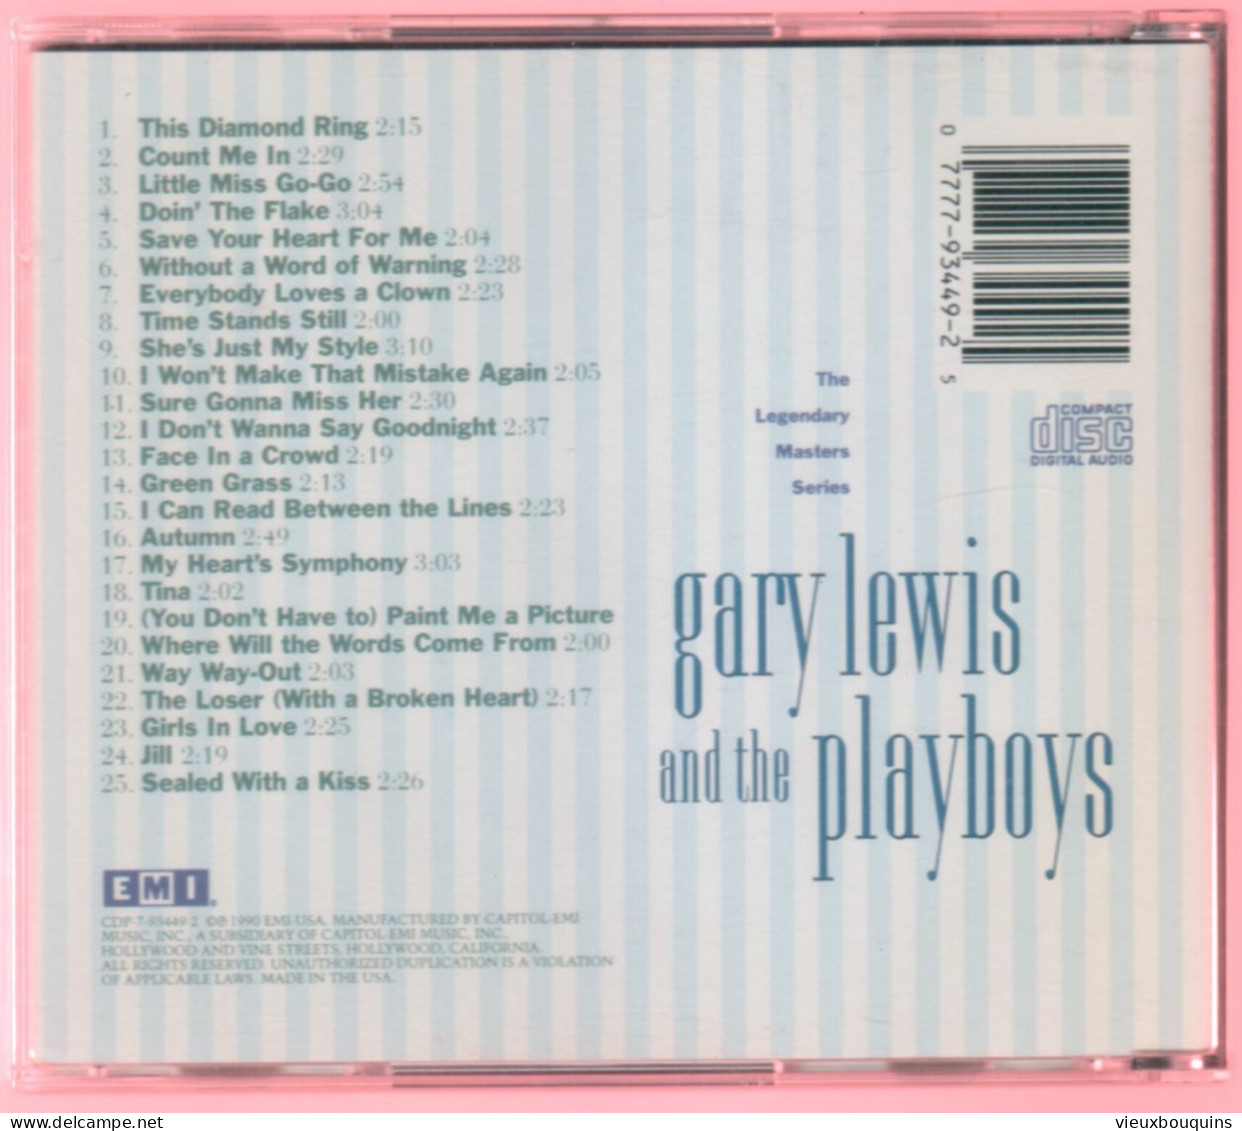 GARY LEWIS AND THE PLAYBOYS (Legendary Masters Series) - Autres - Musique Anglaise